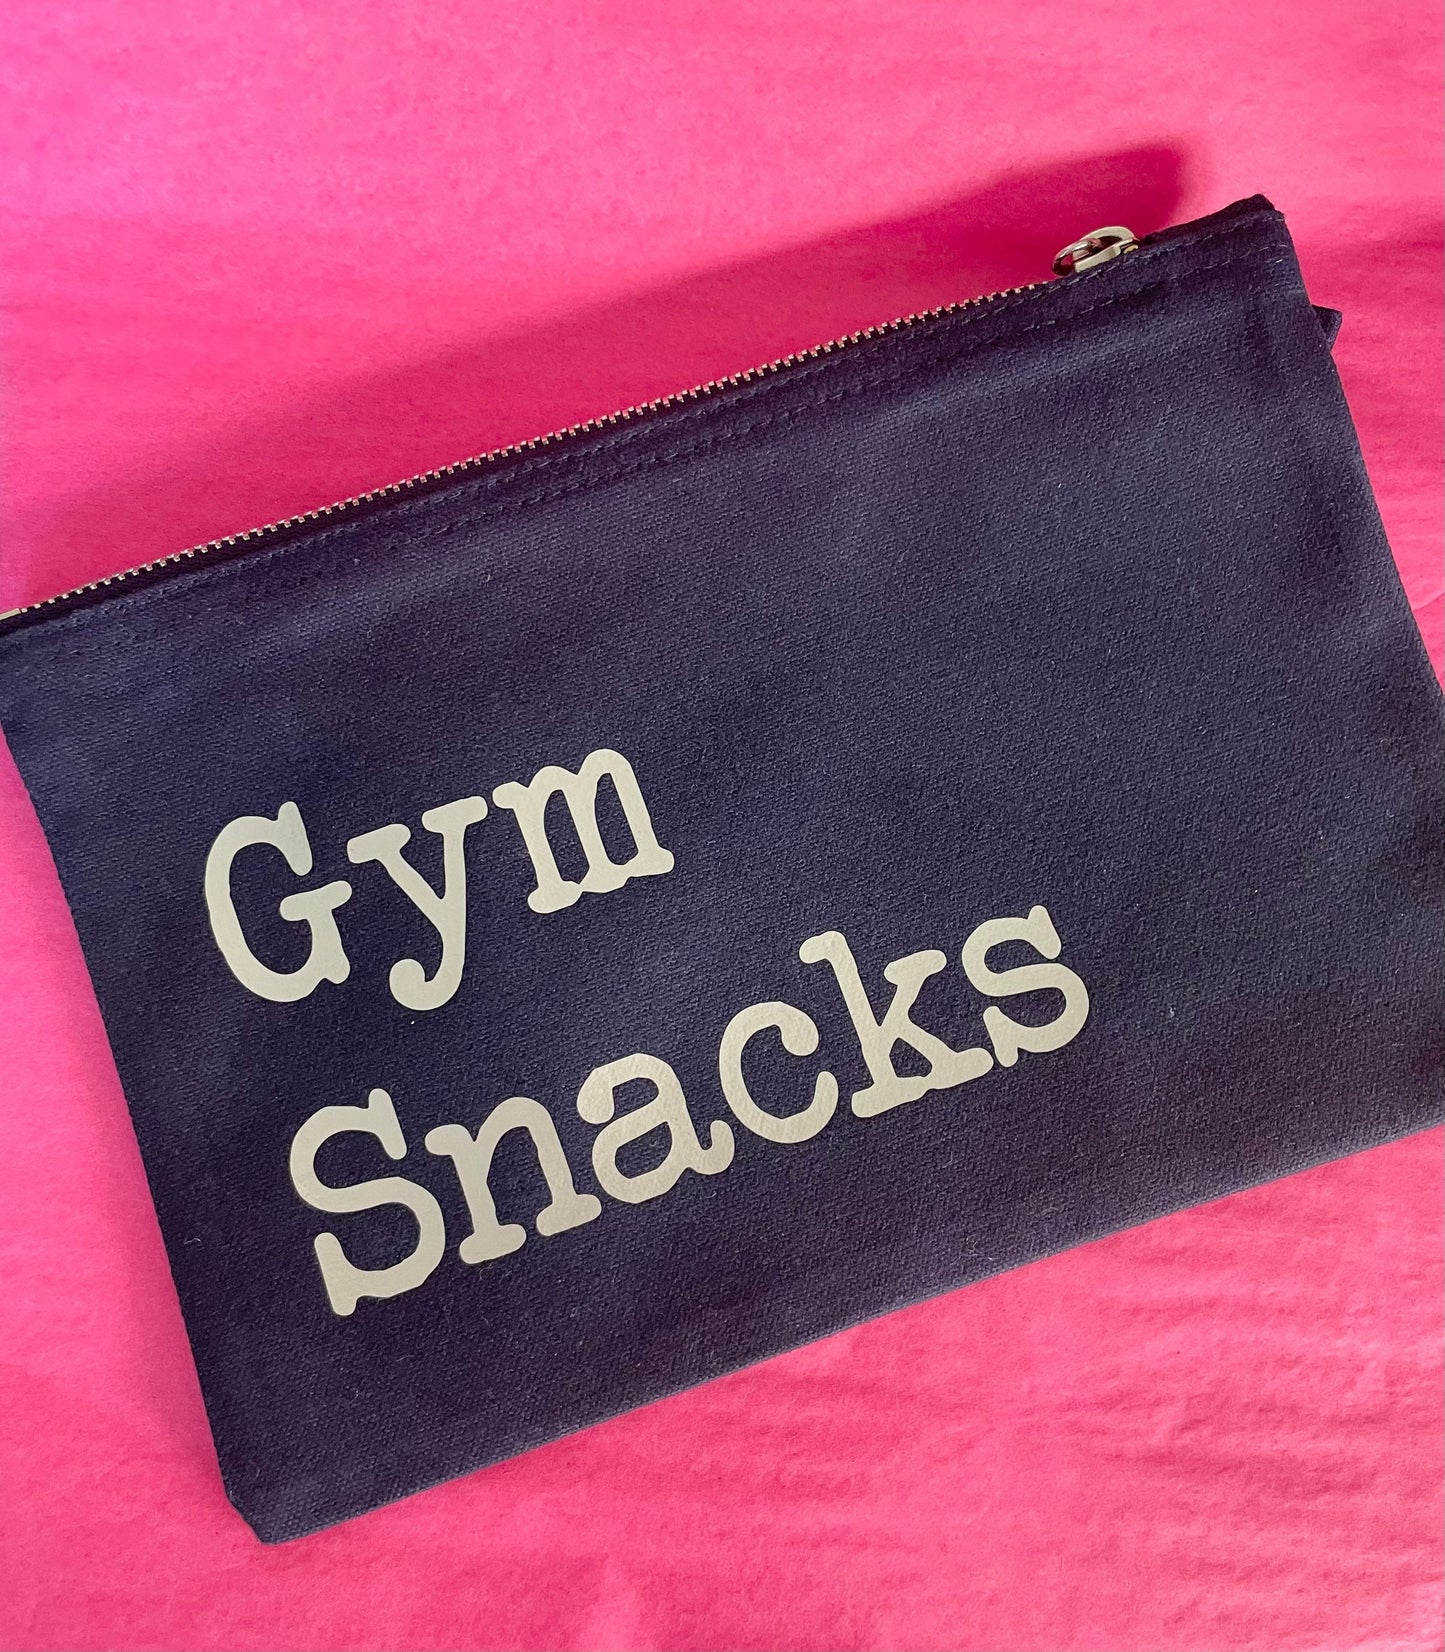 Gym Snacks pouch bag, personalised gym pouch for protein bars or energy drinks, Christmas gift for gym lovers. Get fit New Years resolution